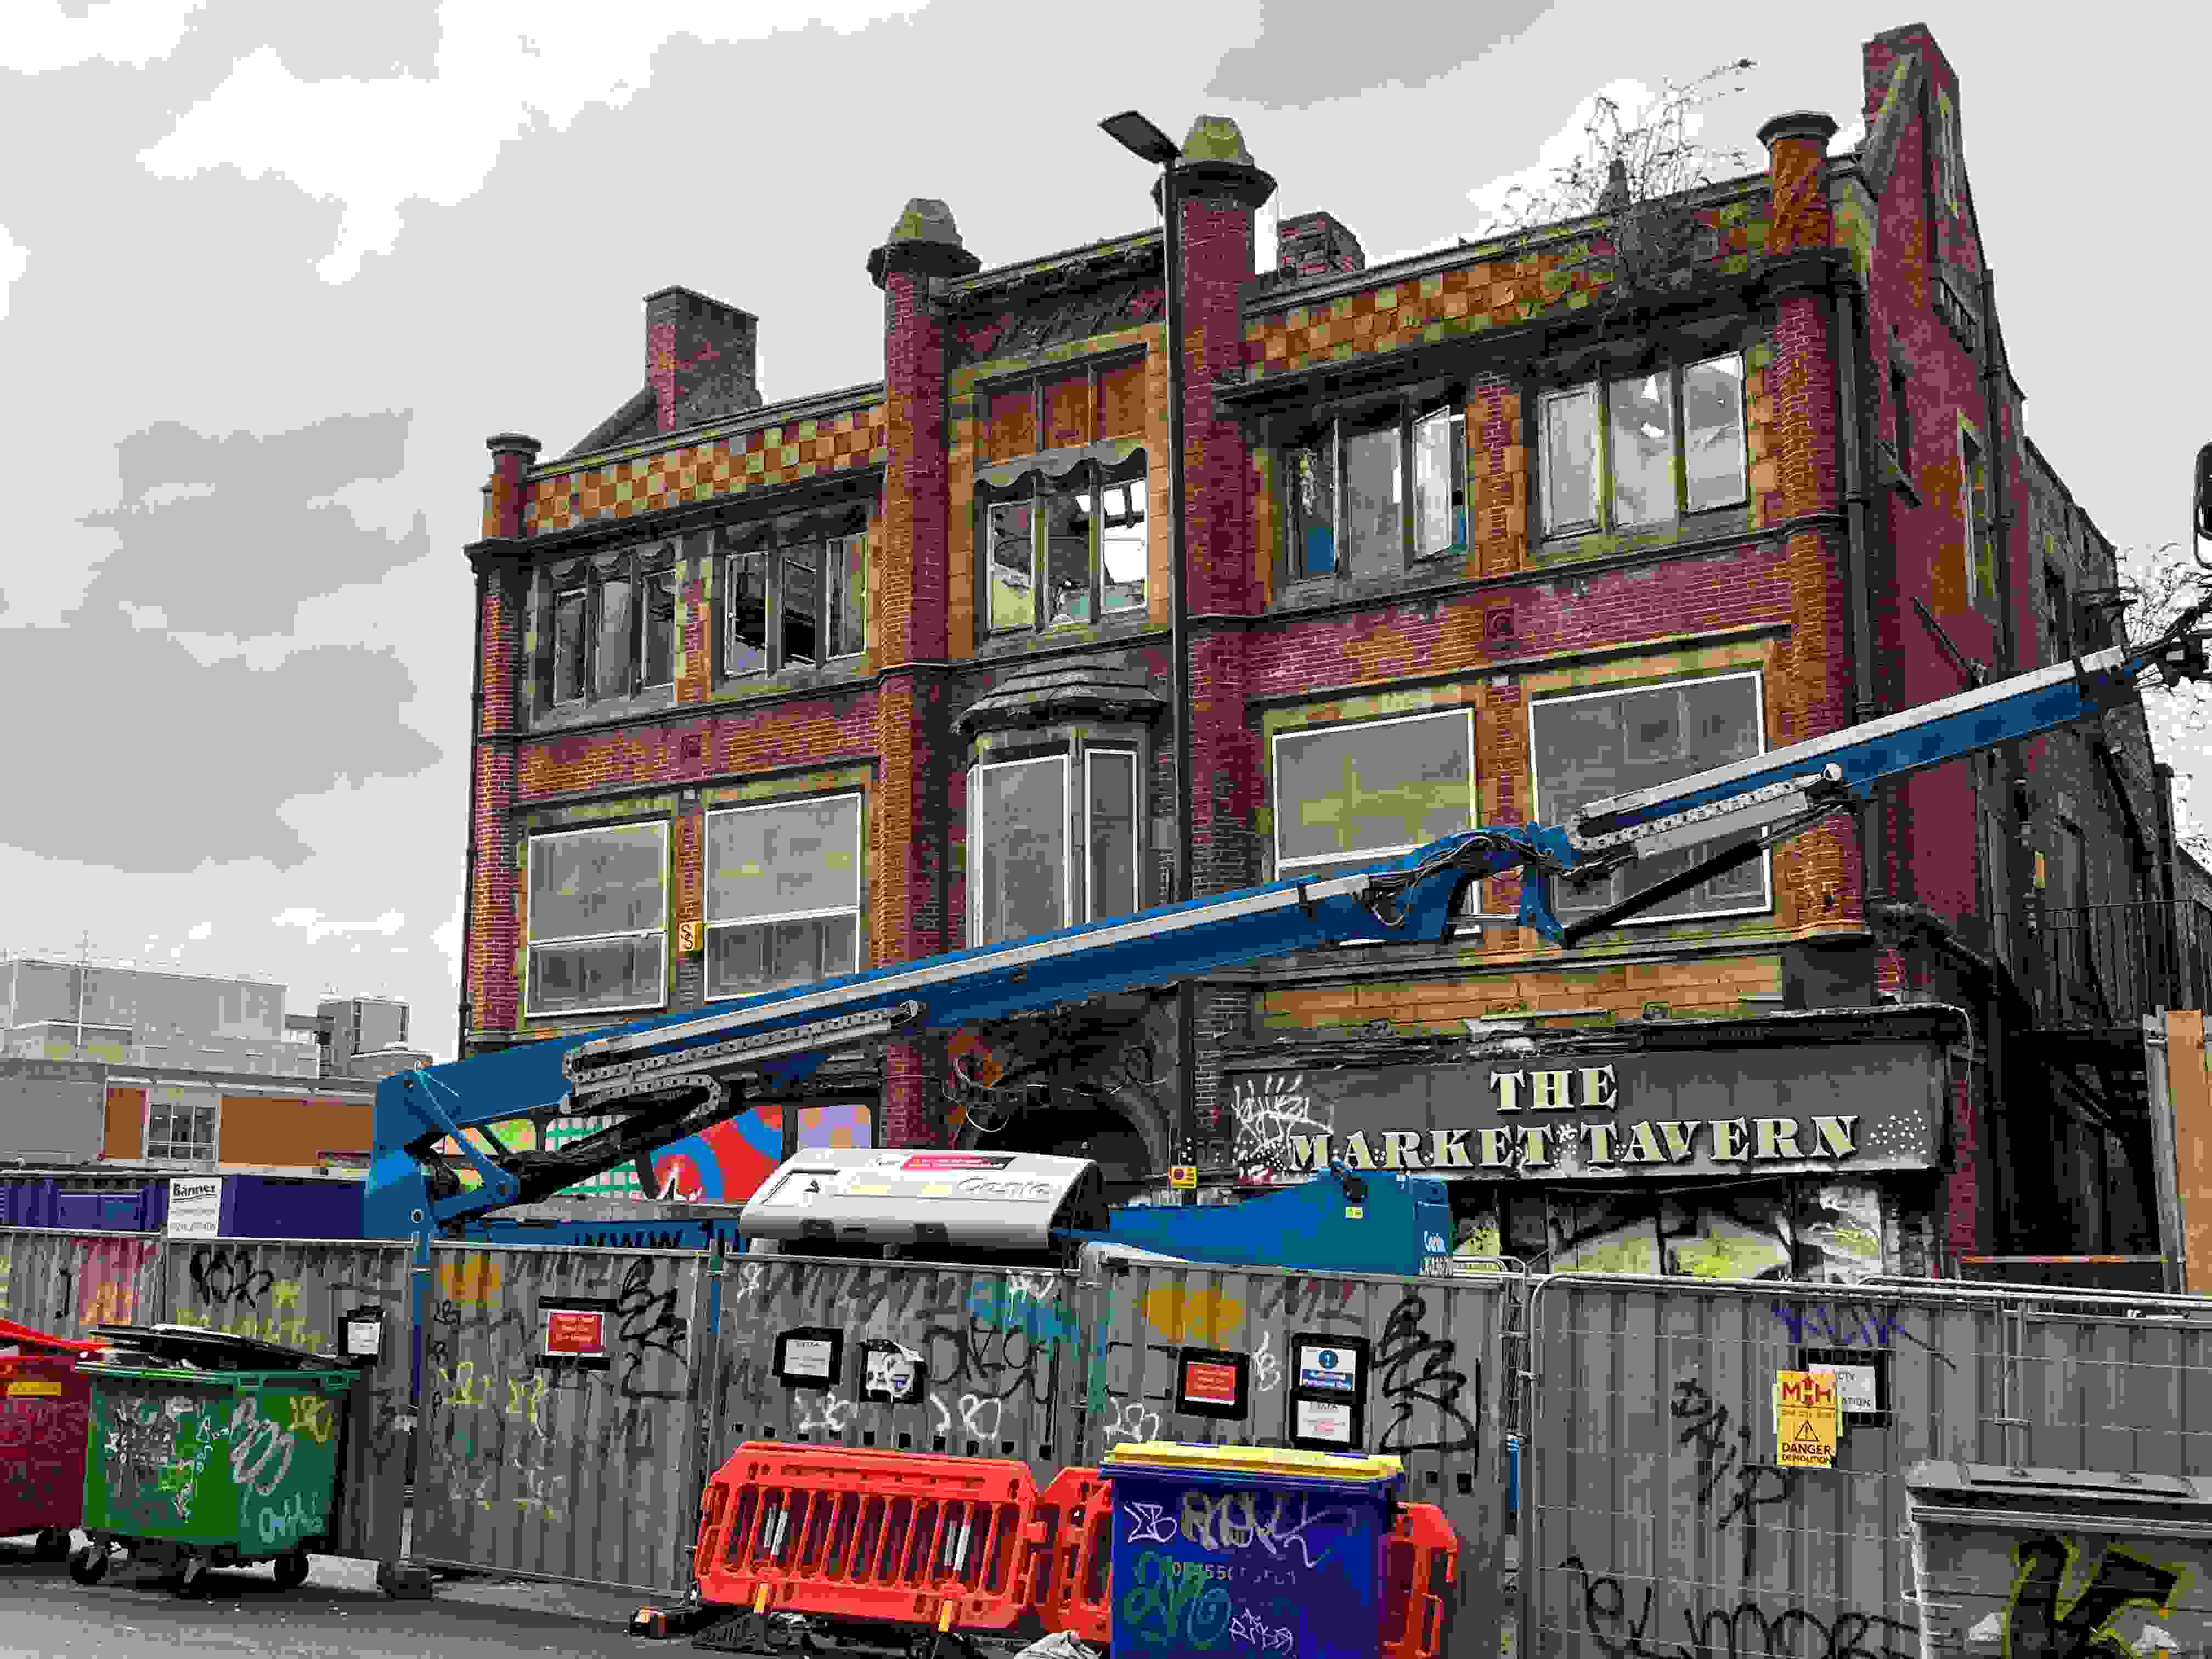 The former Market Tavern pub house with demolition work evident on the upper floors with a blue cherry picker in front and the building is surrounded by hoardings